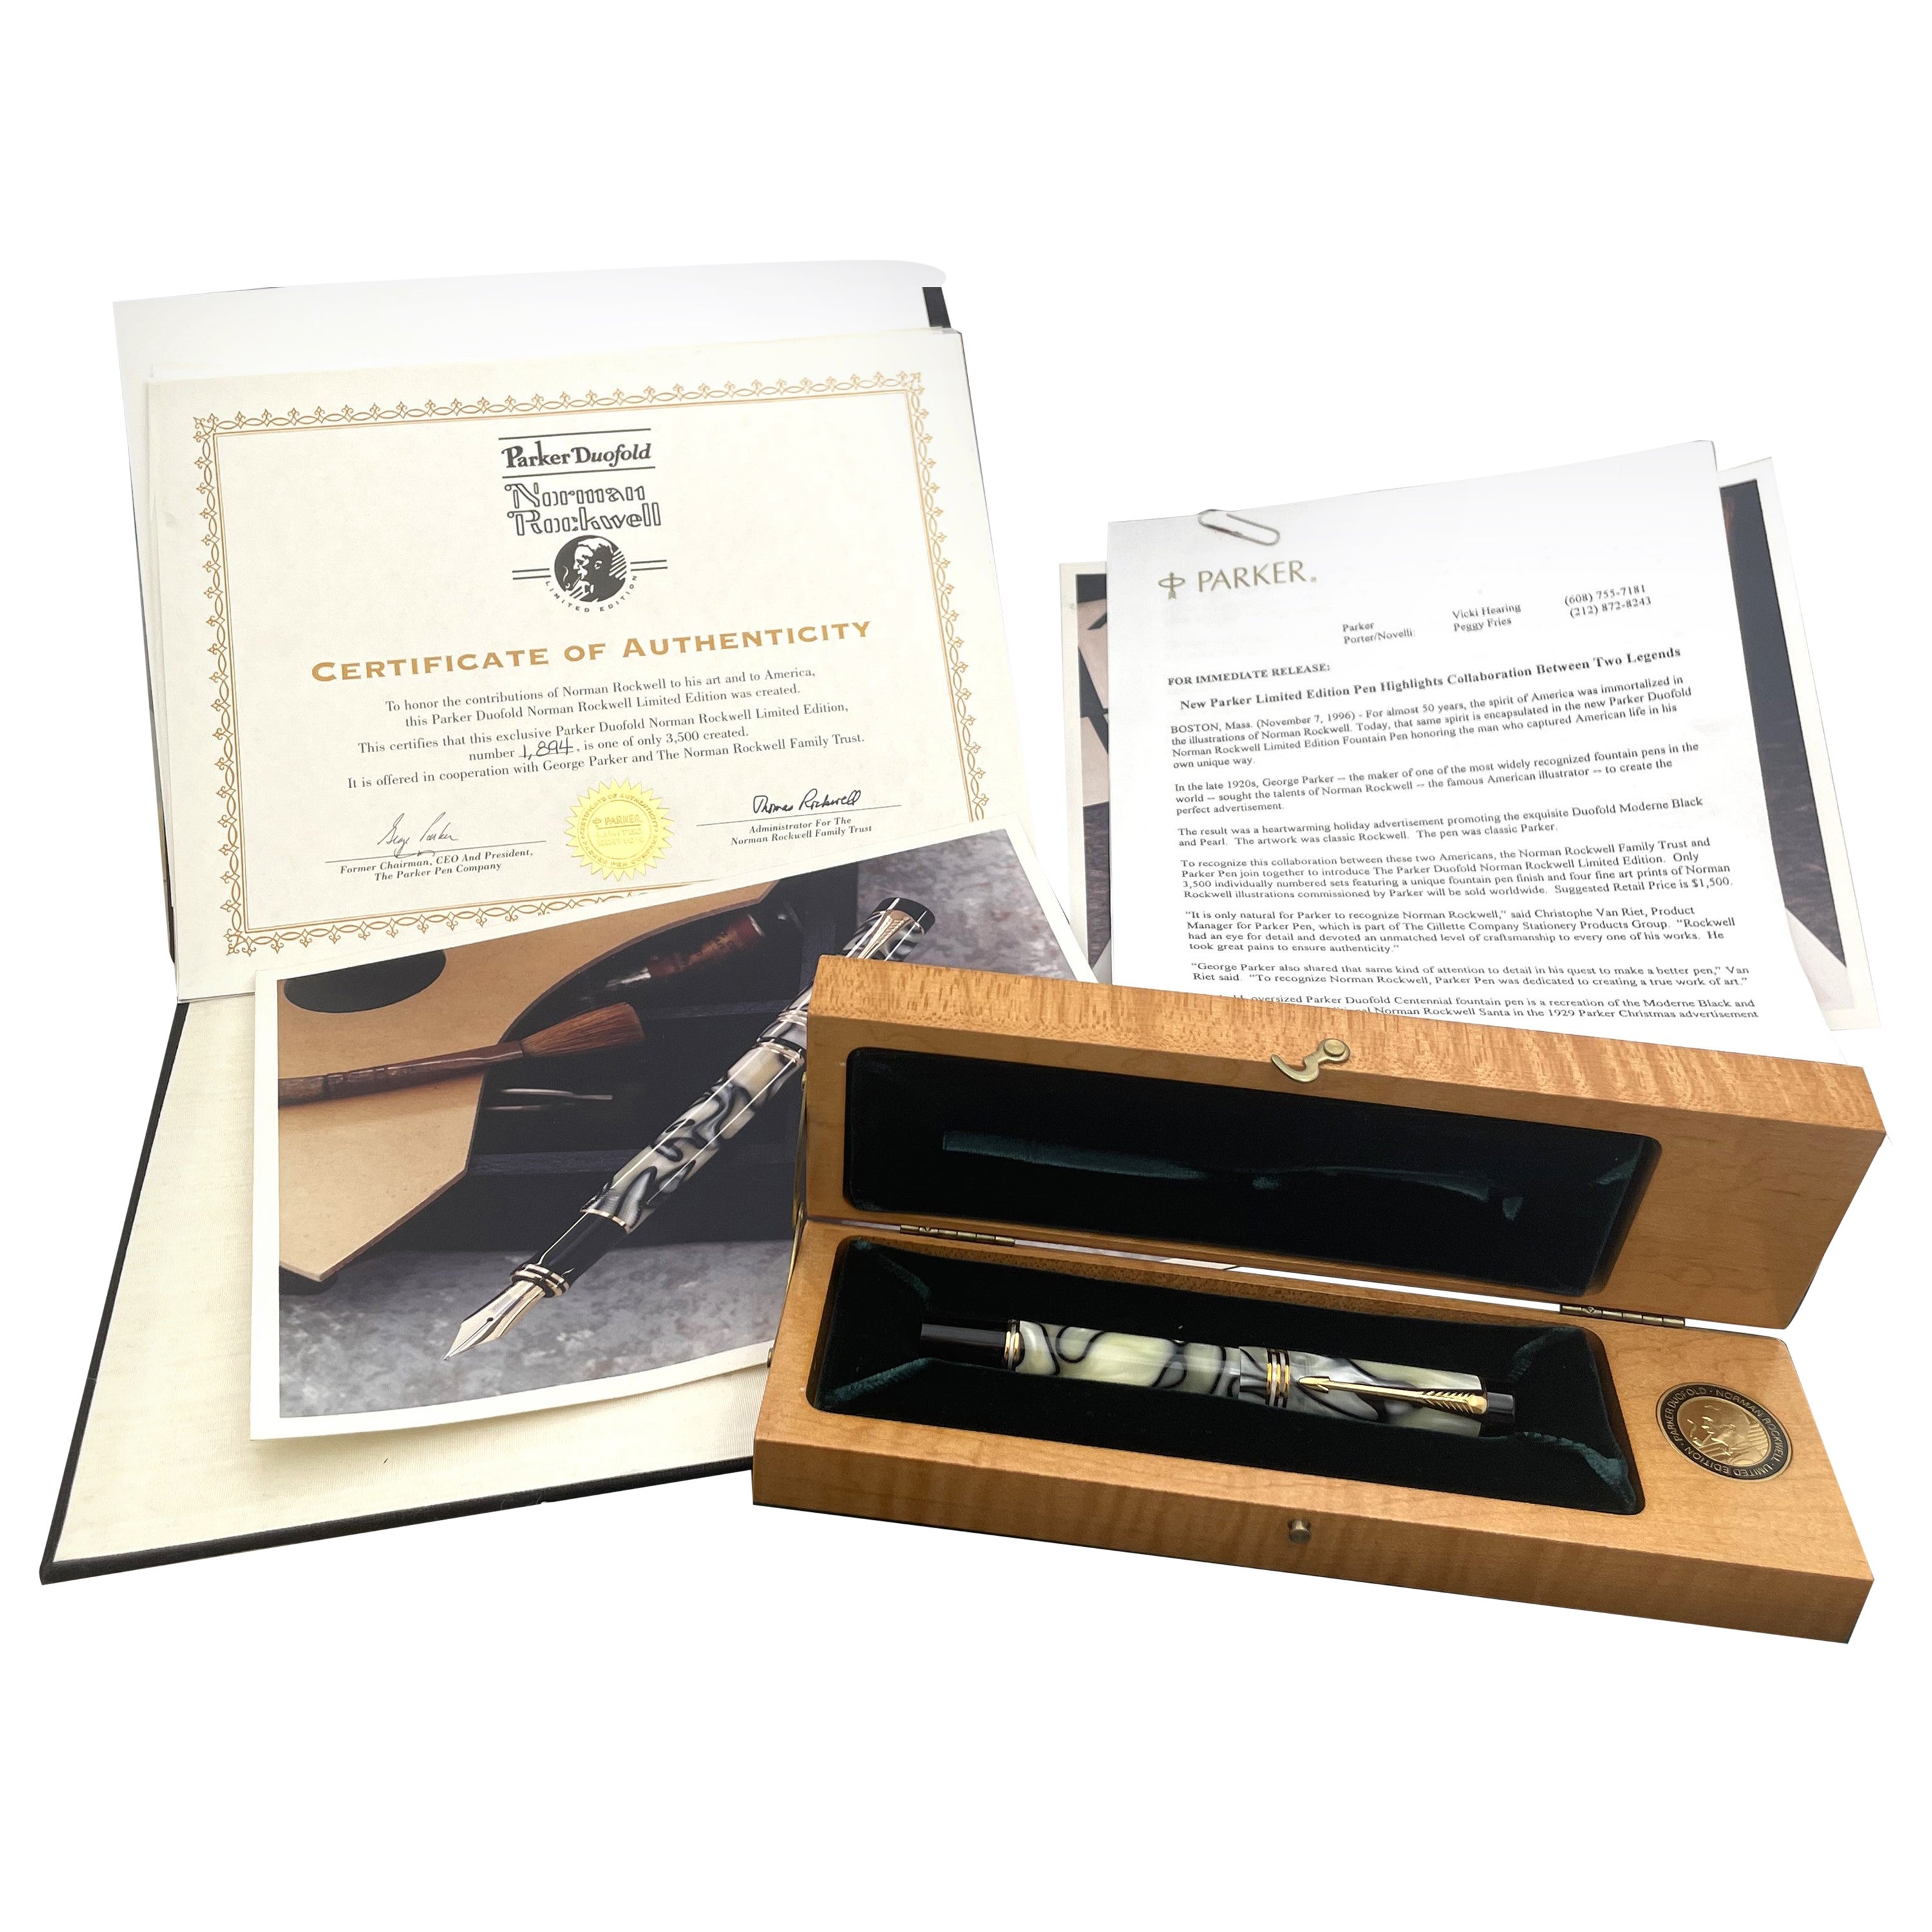 Parker Norman Rockwell Limited Edition Fountain Pen w/ Rare Documents & Prints For Sale